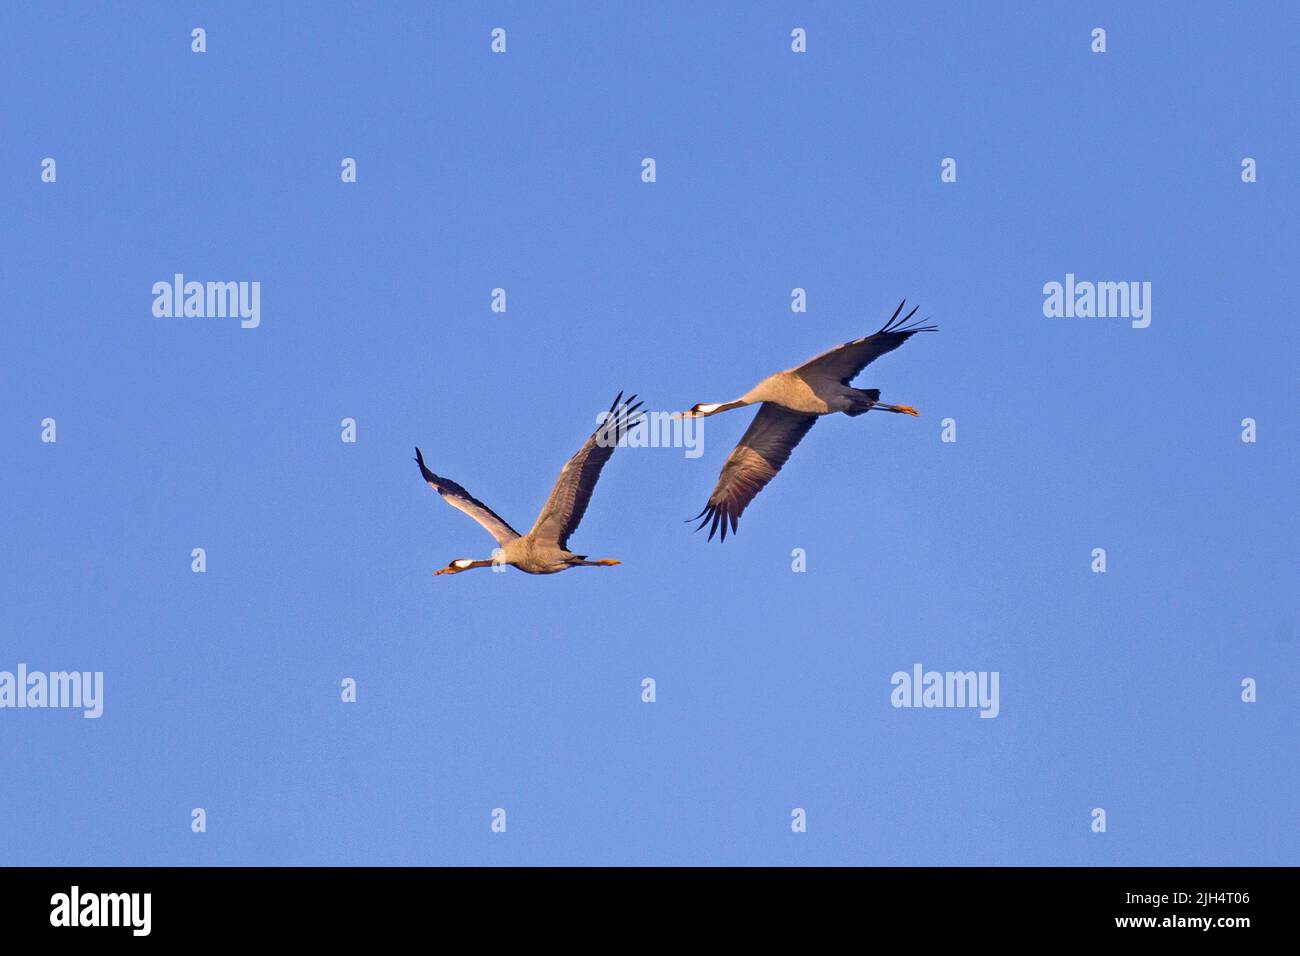 Common crane, Eurasian Crane (Grus grus), two cranes flying together in the blue sky, Germany, Mecklenburg-Western Pomerania Stock Photo